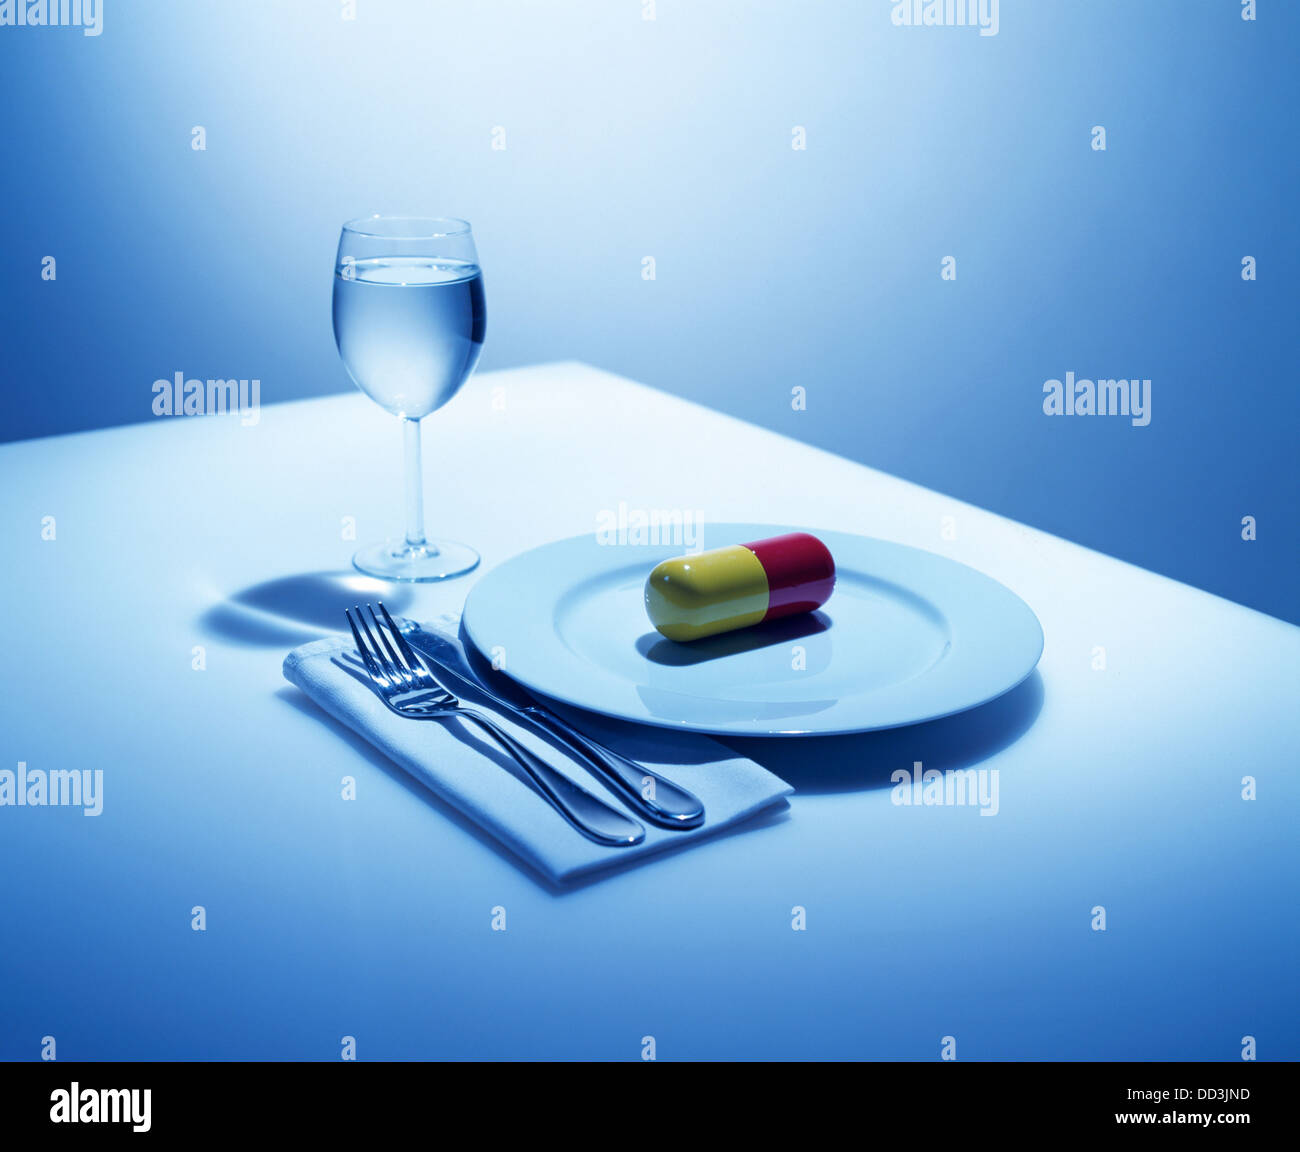 A dinning place setting with just an over sized capsule on the plate. Stock Photo